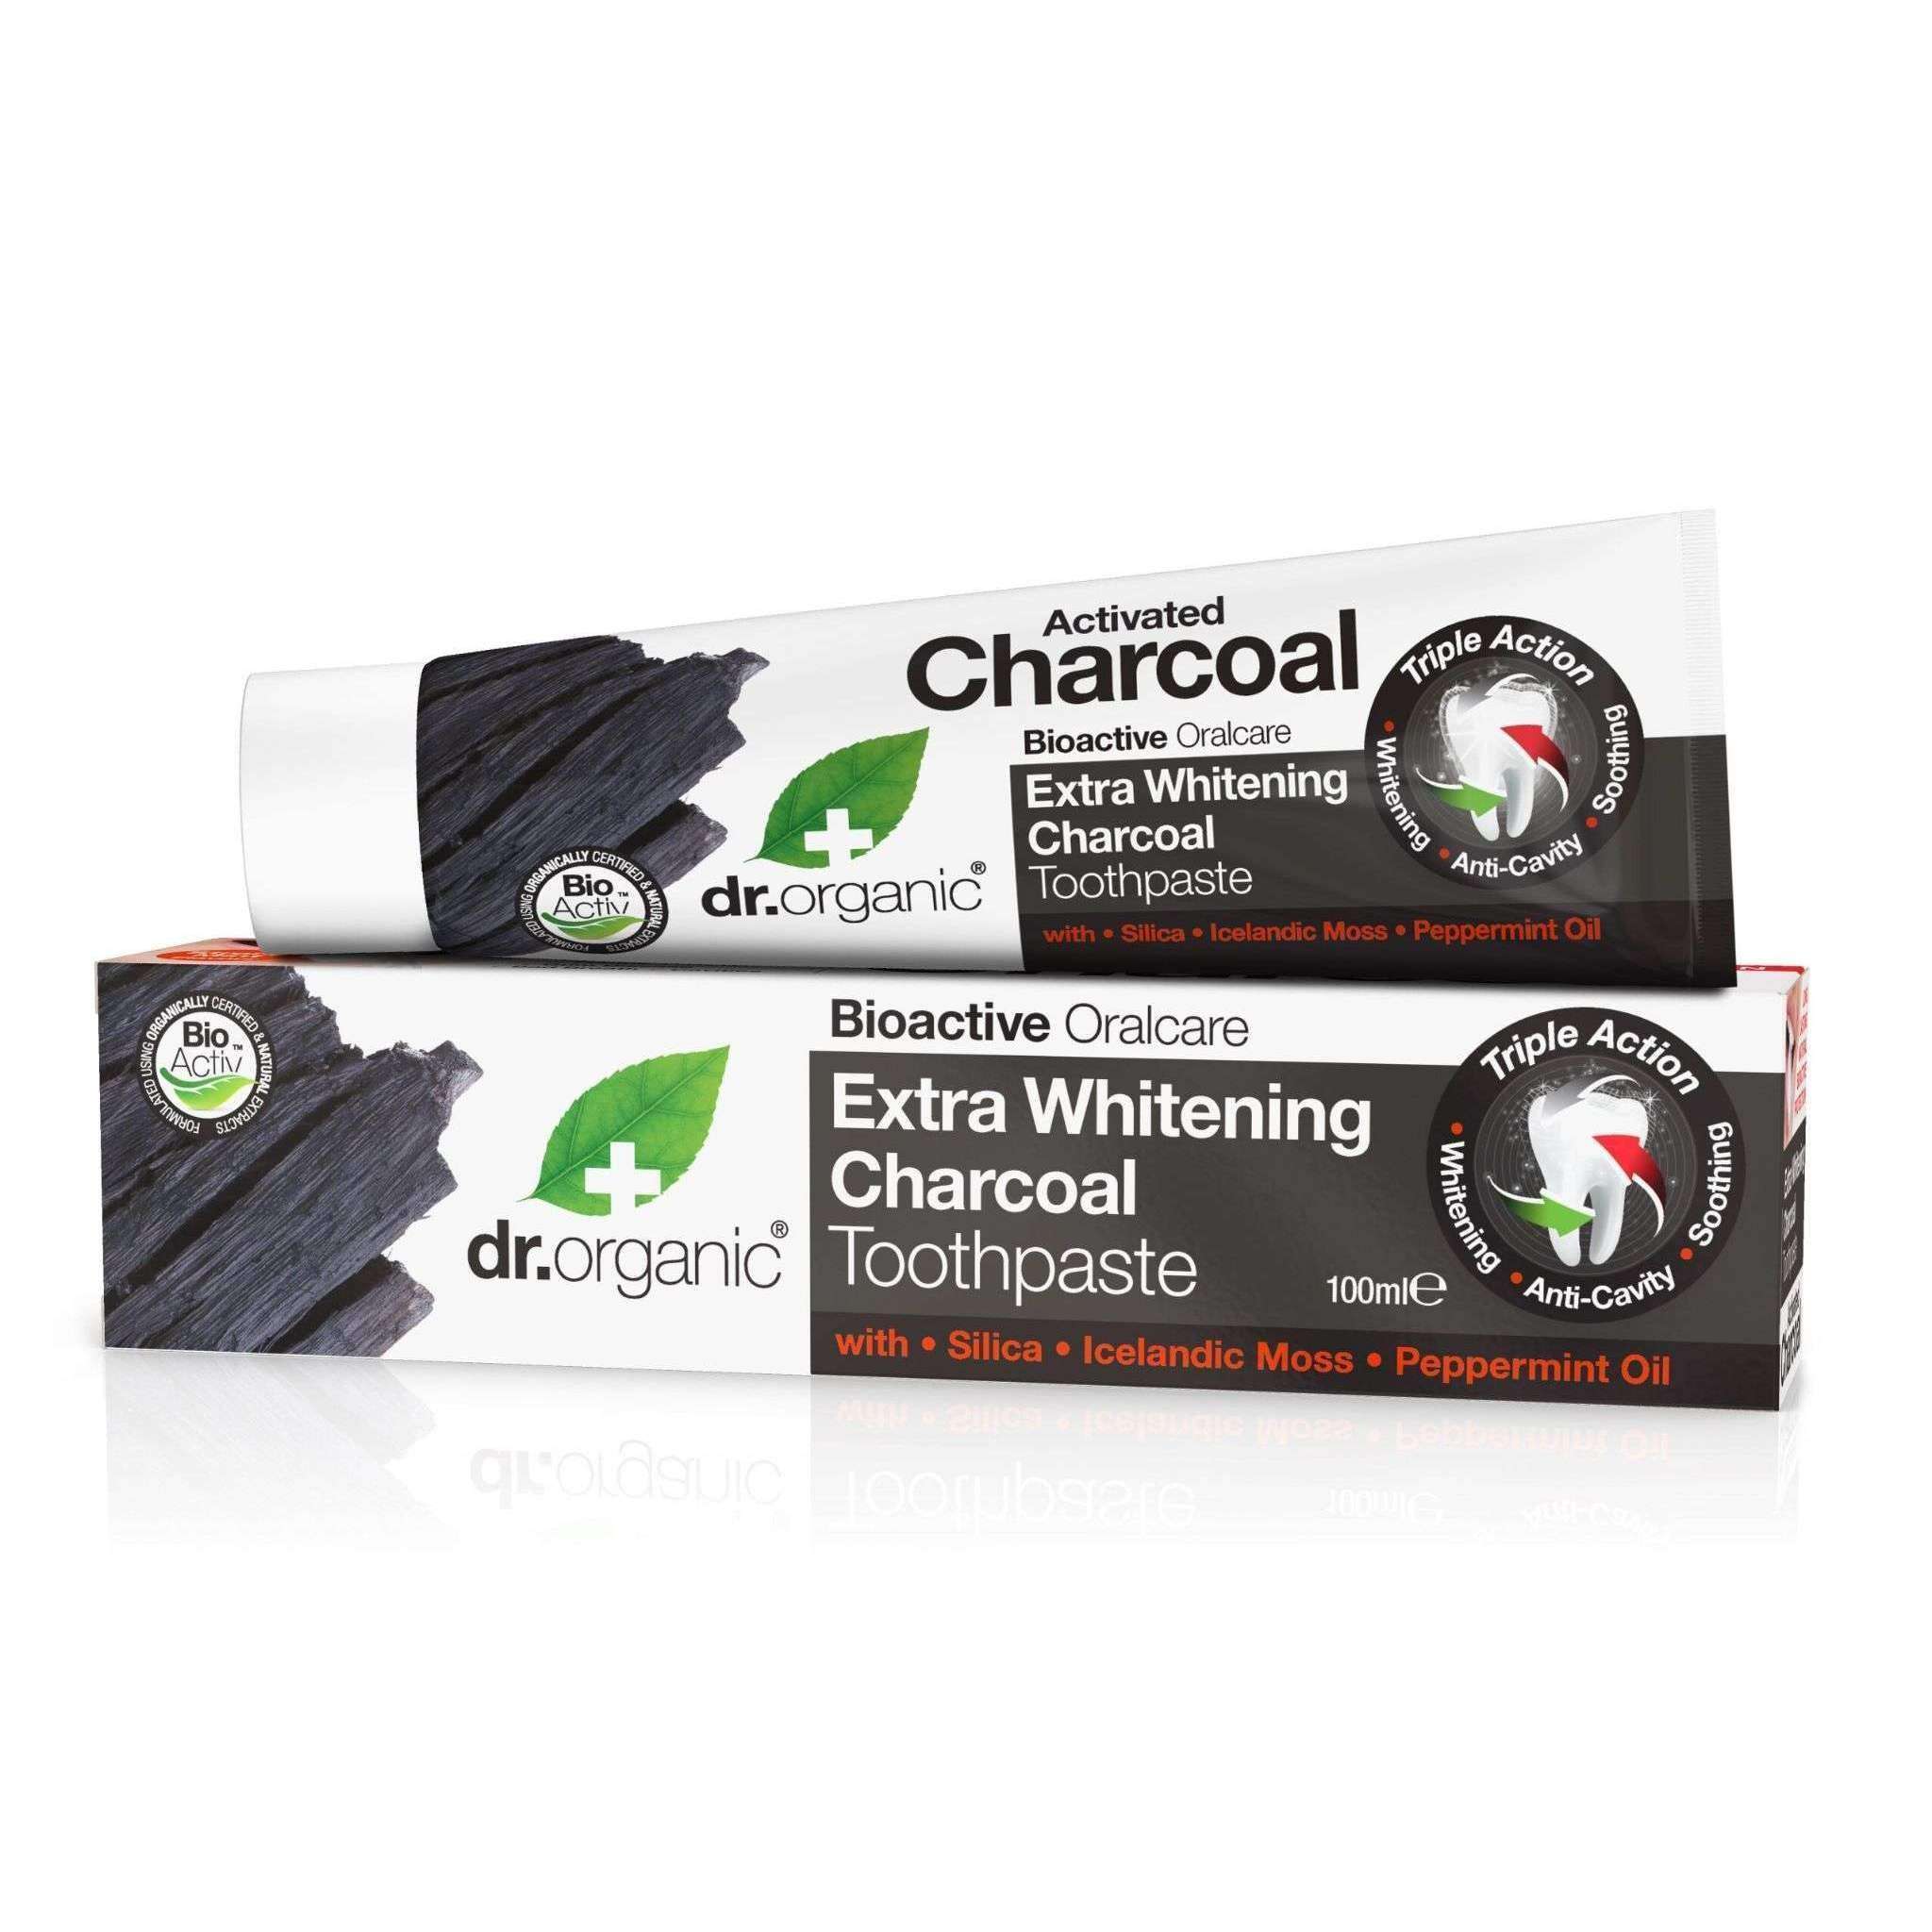 Dr.Organic Activated Charcoal Whitening Toothpaste